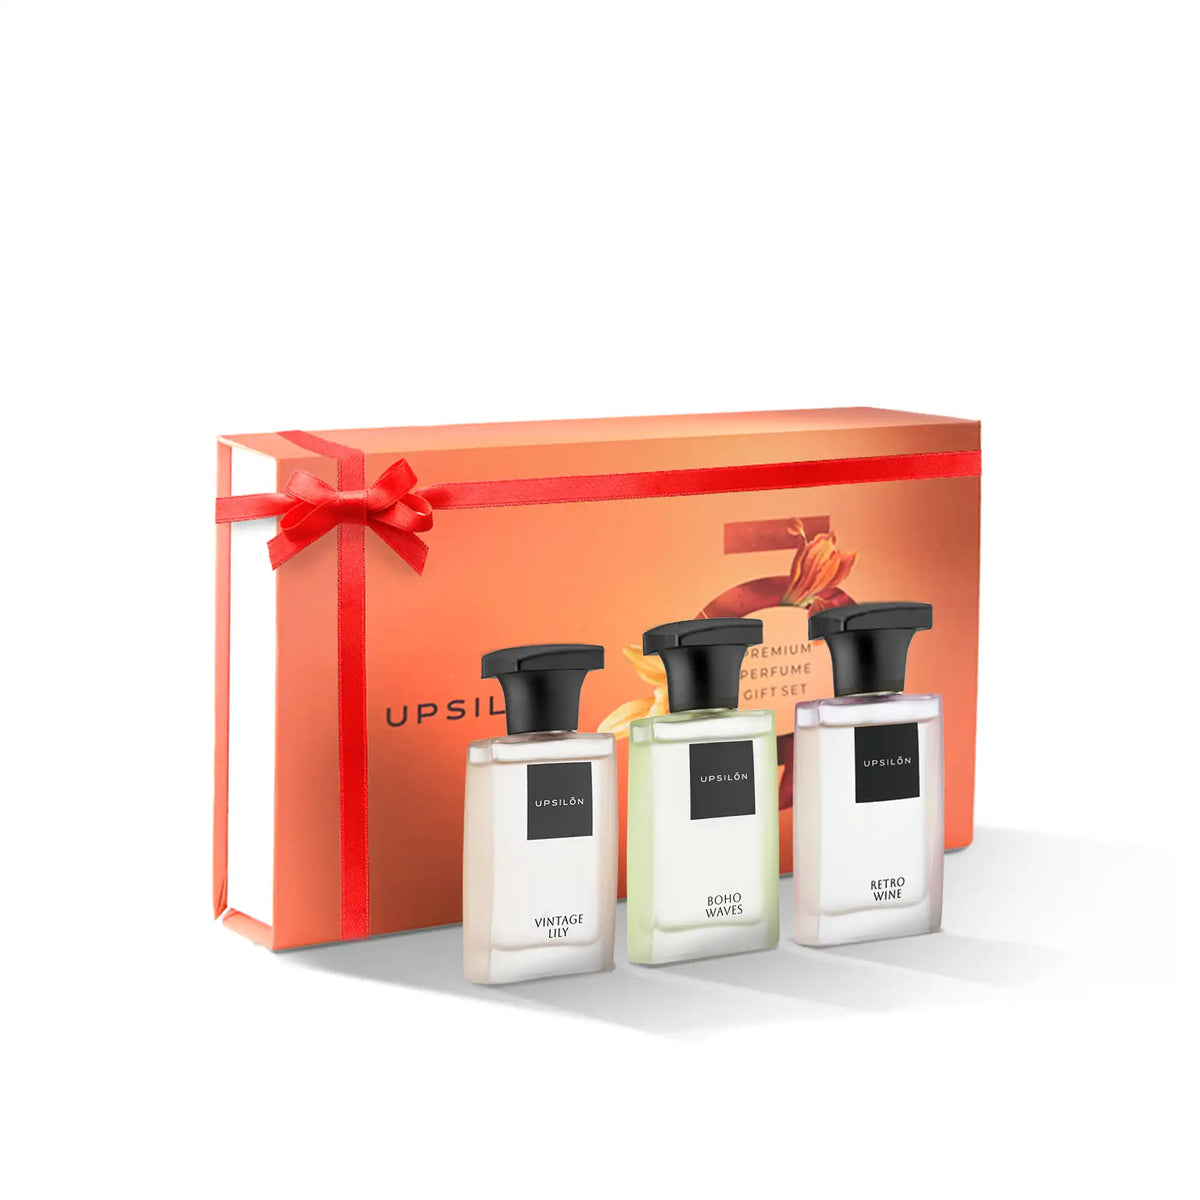 High-end men's perfume gift set with three Upsilon fragrances: Shooting Star, Golden Sand, and Vintage. Perfect for the discerning gentleman